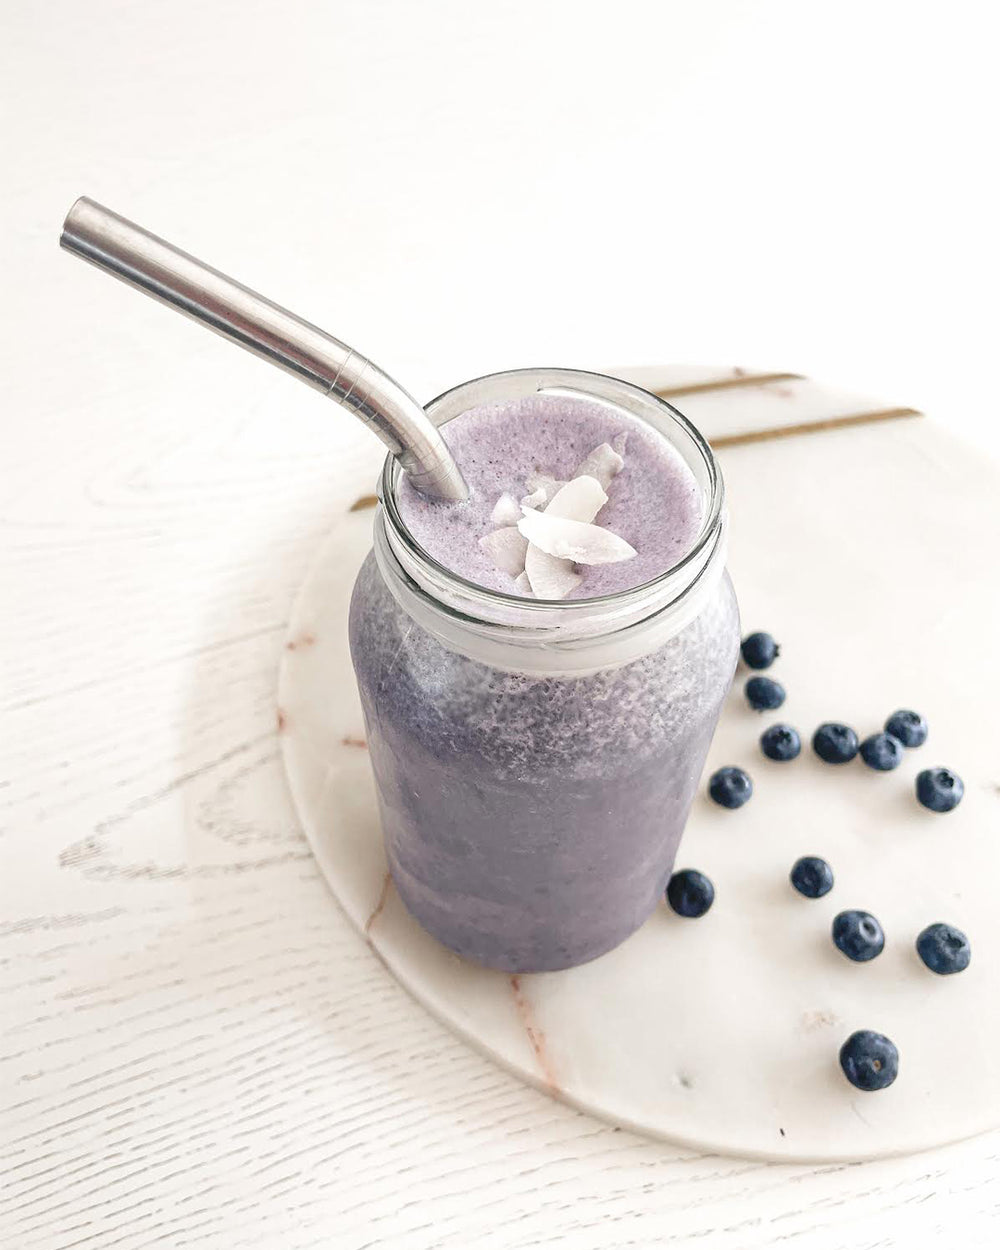 Image of a glass of purple smoothie with blueberries scattered on the table.